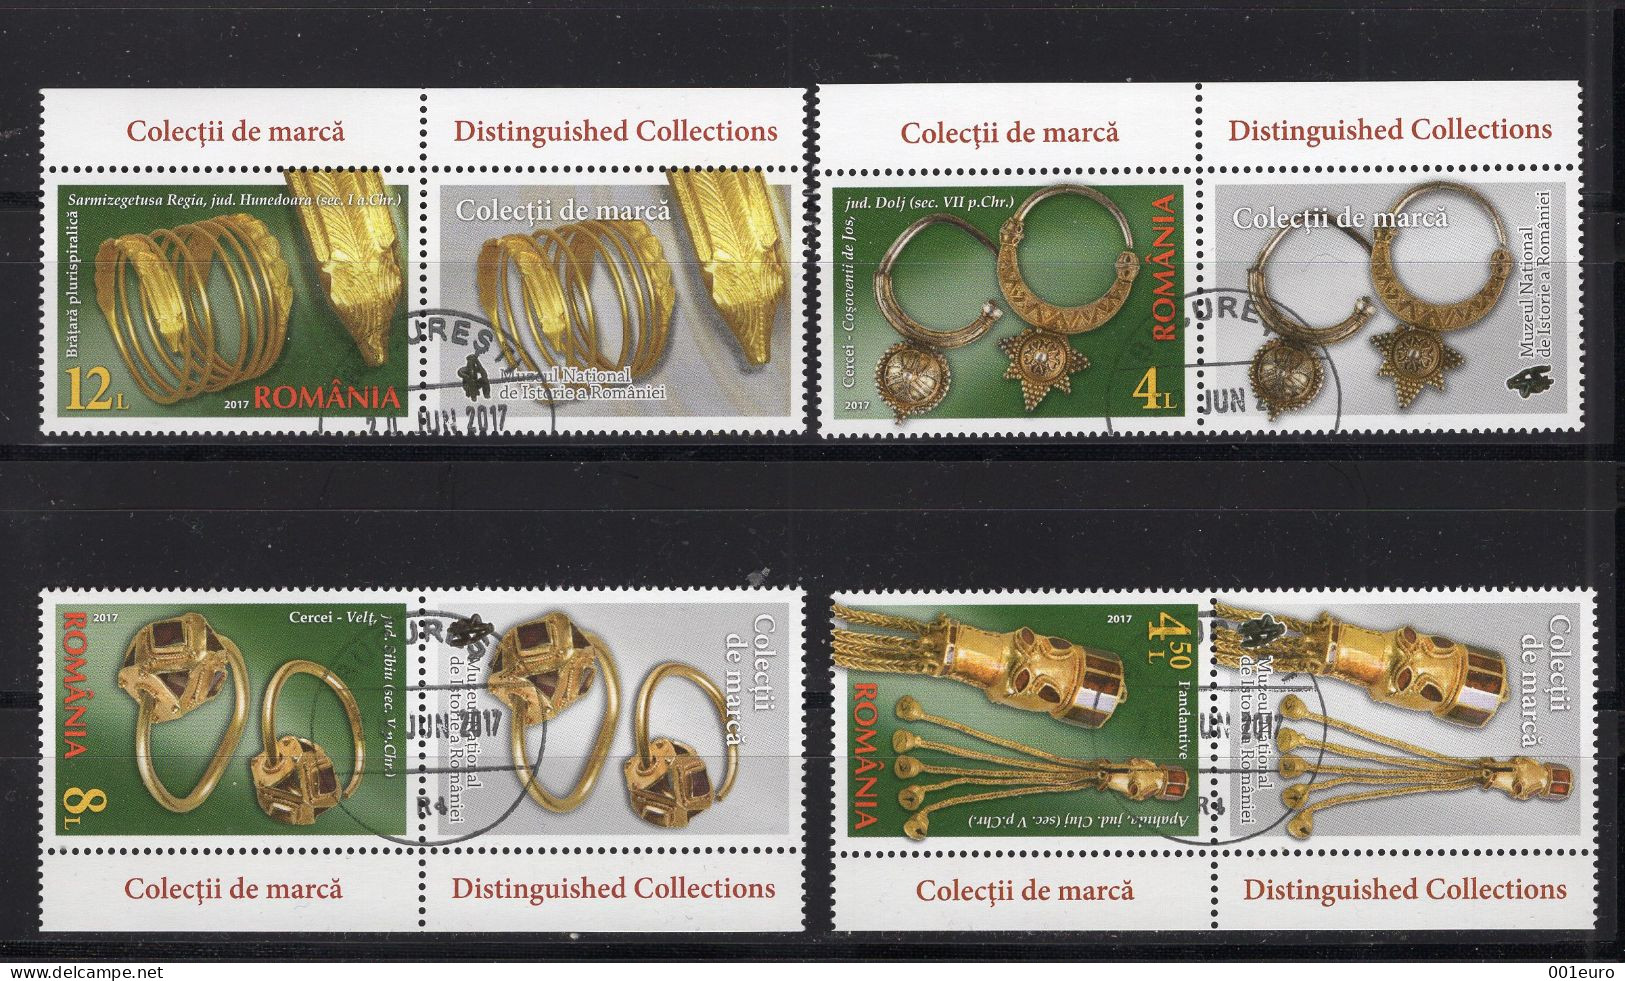 ROMANIA 2017: DISTINGUISHED COLLECTIONS, Set Of 4 Used Stamps + Vignettes - Registered Shipping! - Usati